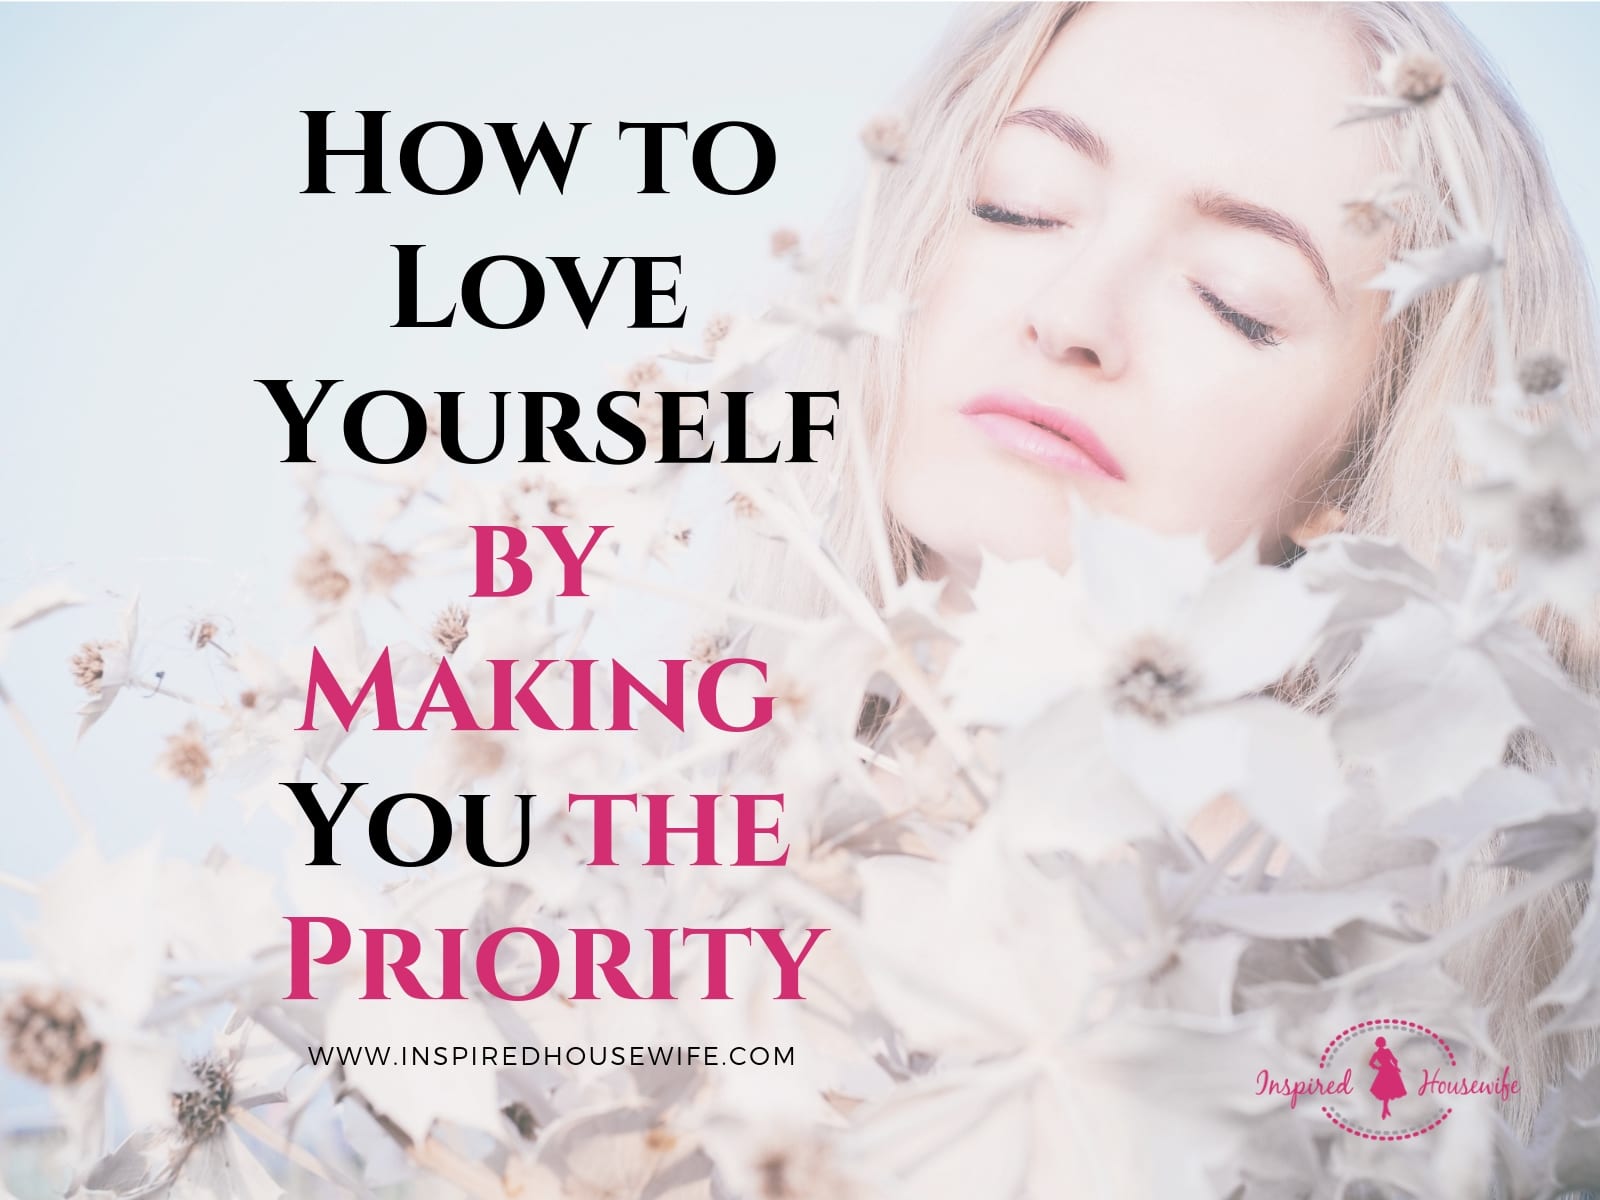 How to Love Yourself by Making You the Priority